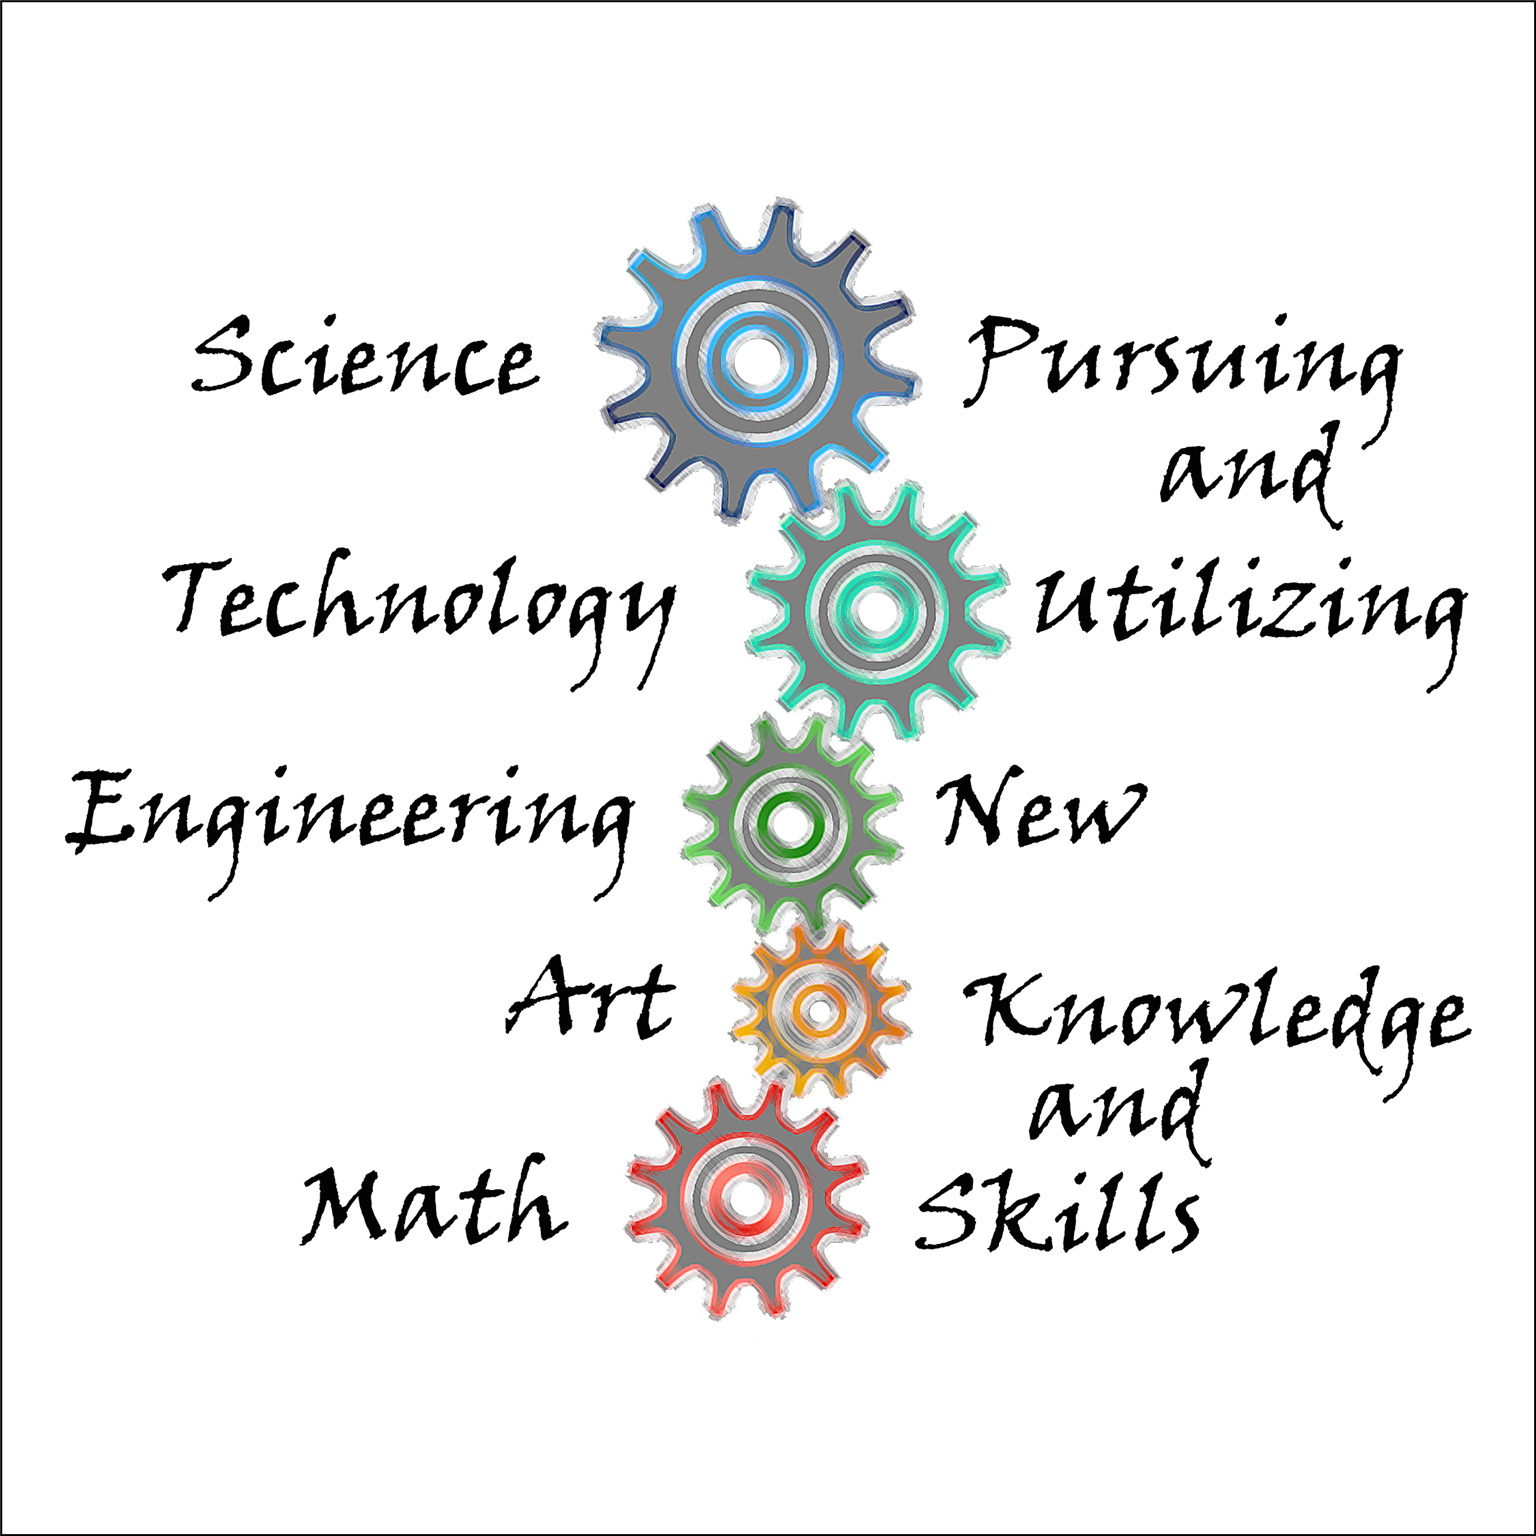 Science Technology Engineering Art Mathematics Pursuing and Utilizing New Knowledge and Skills